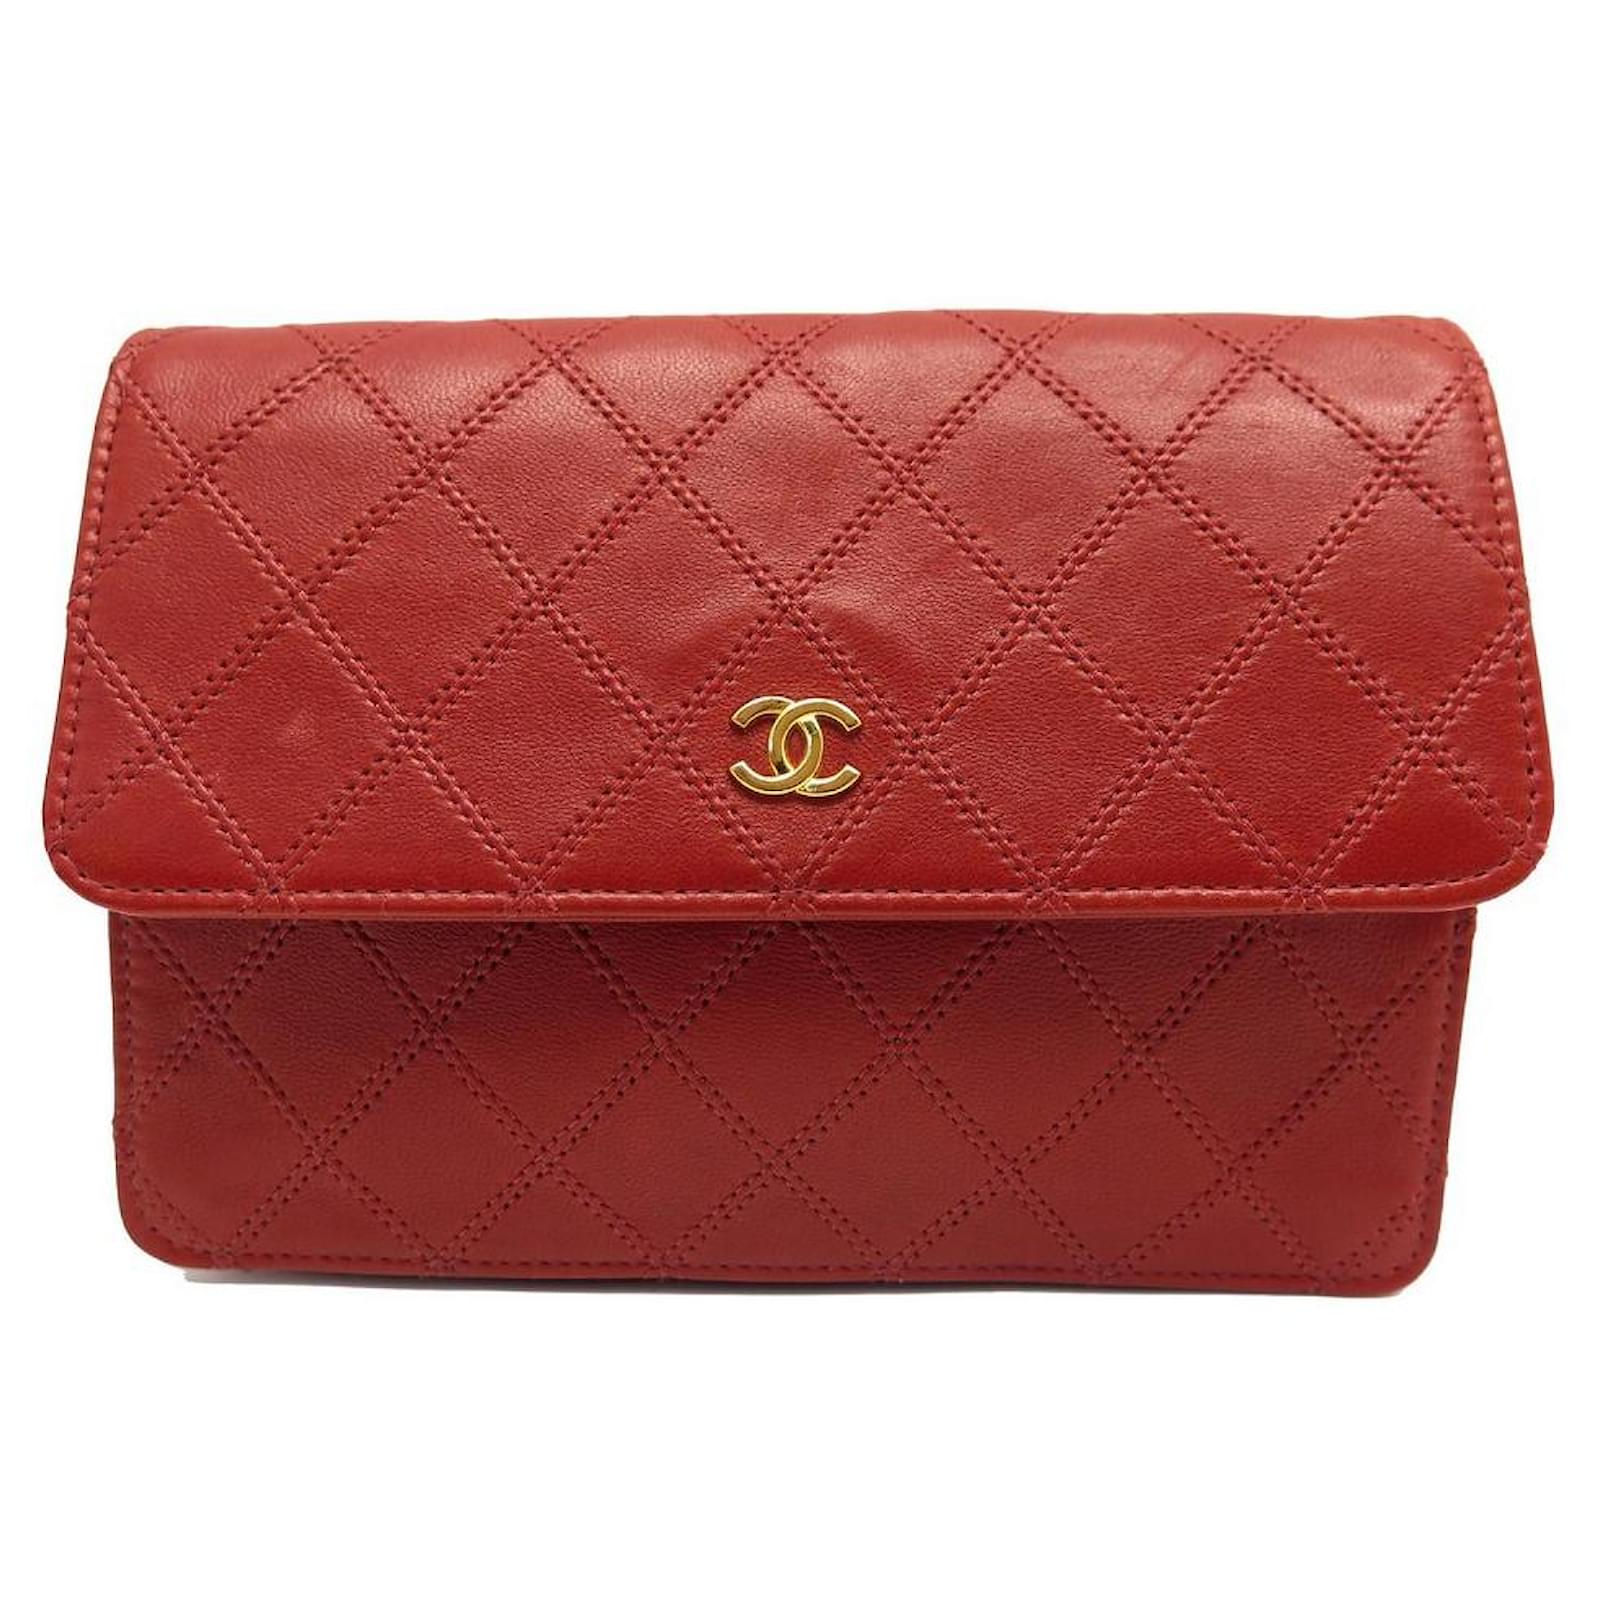 VINTAGE CHANEL TIMELESS SMALL HAND POUCH 17CM CLUTCH QUILTED